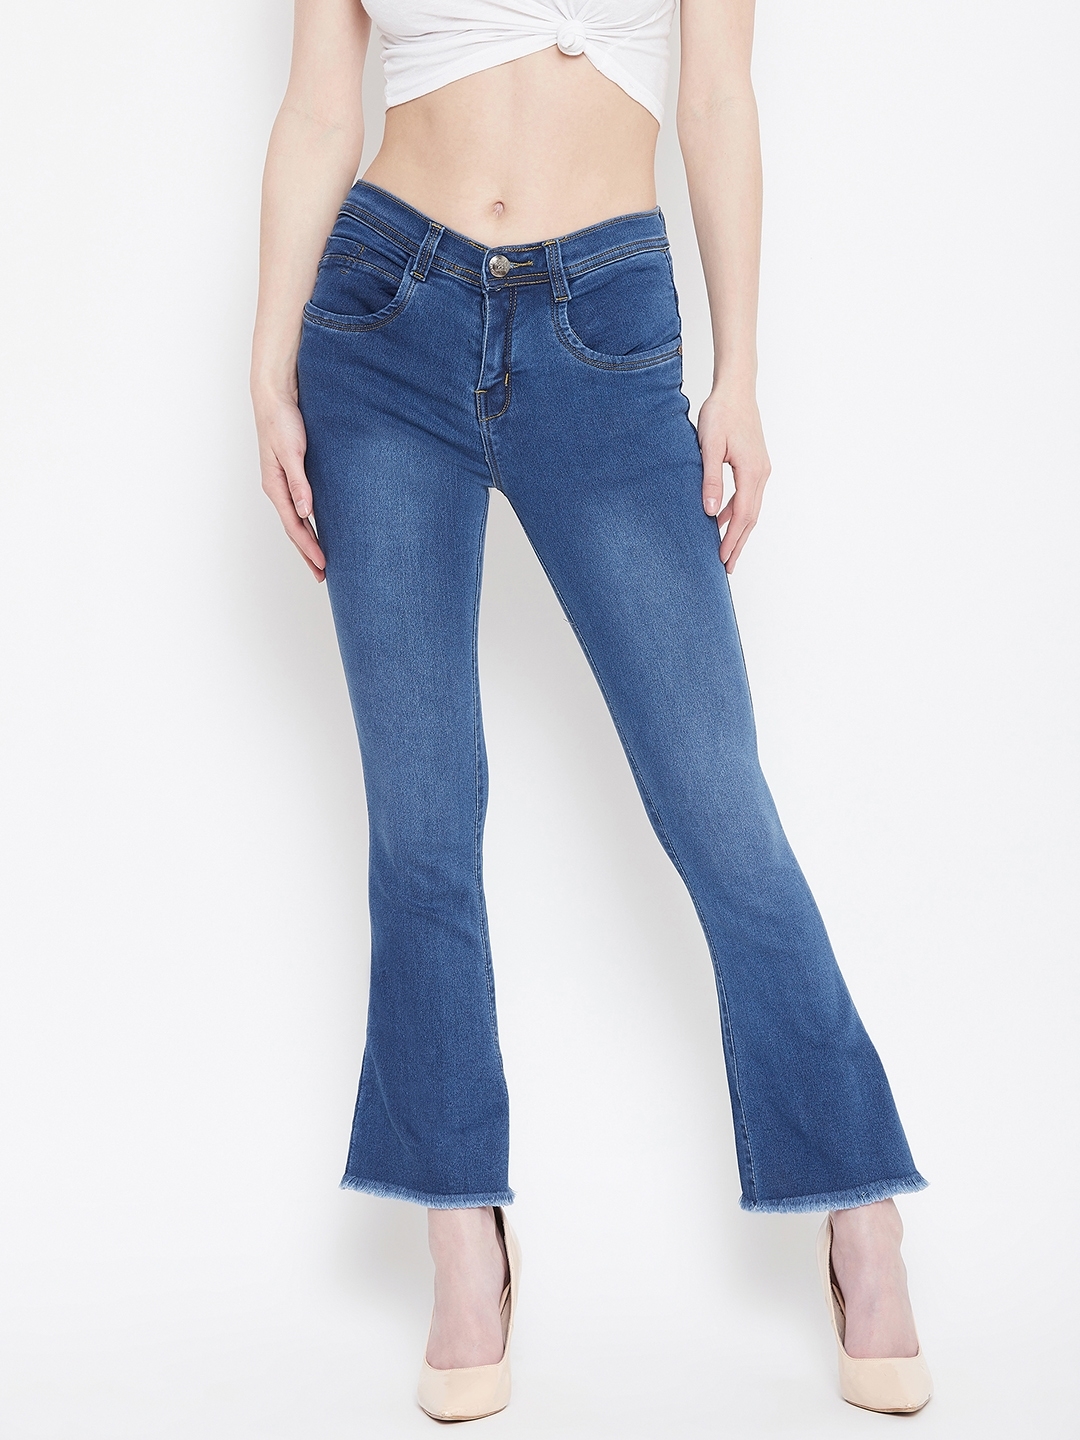 Nifty | Nifty Women's Causal Jeans